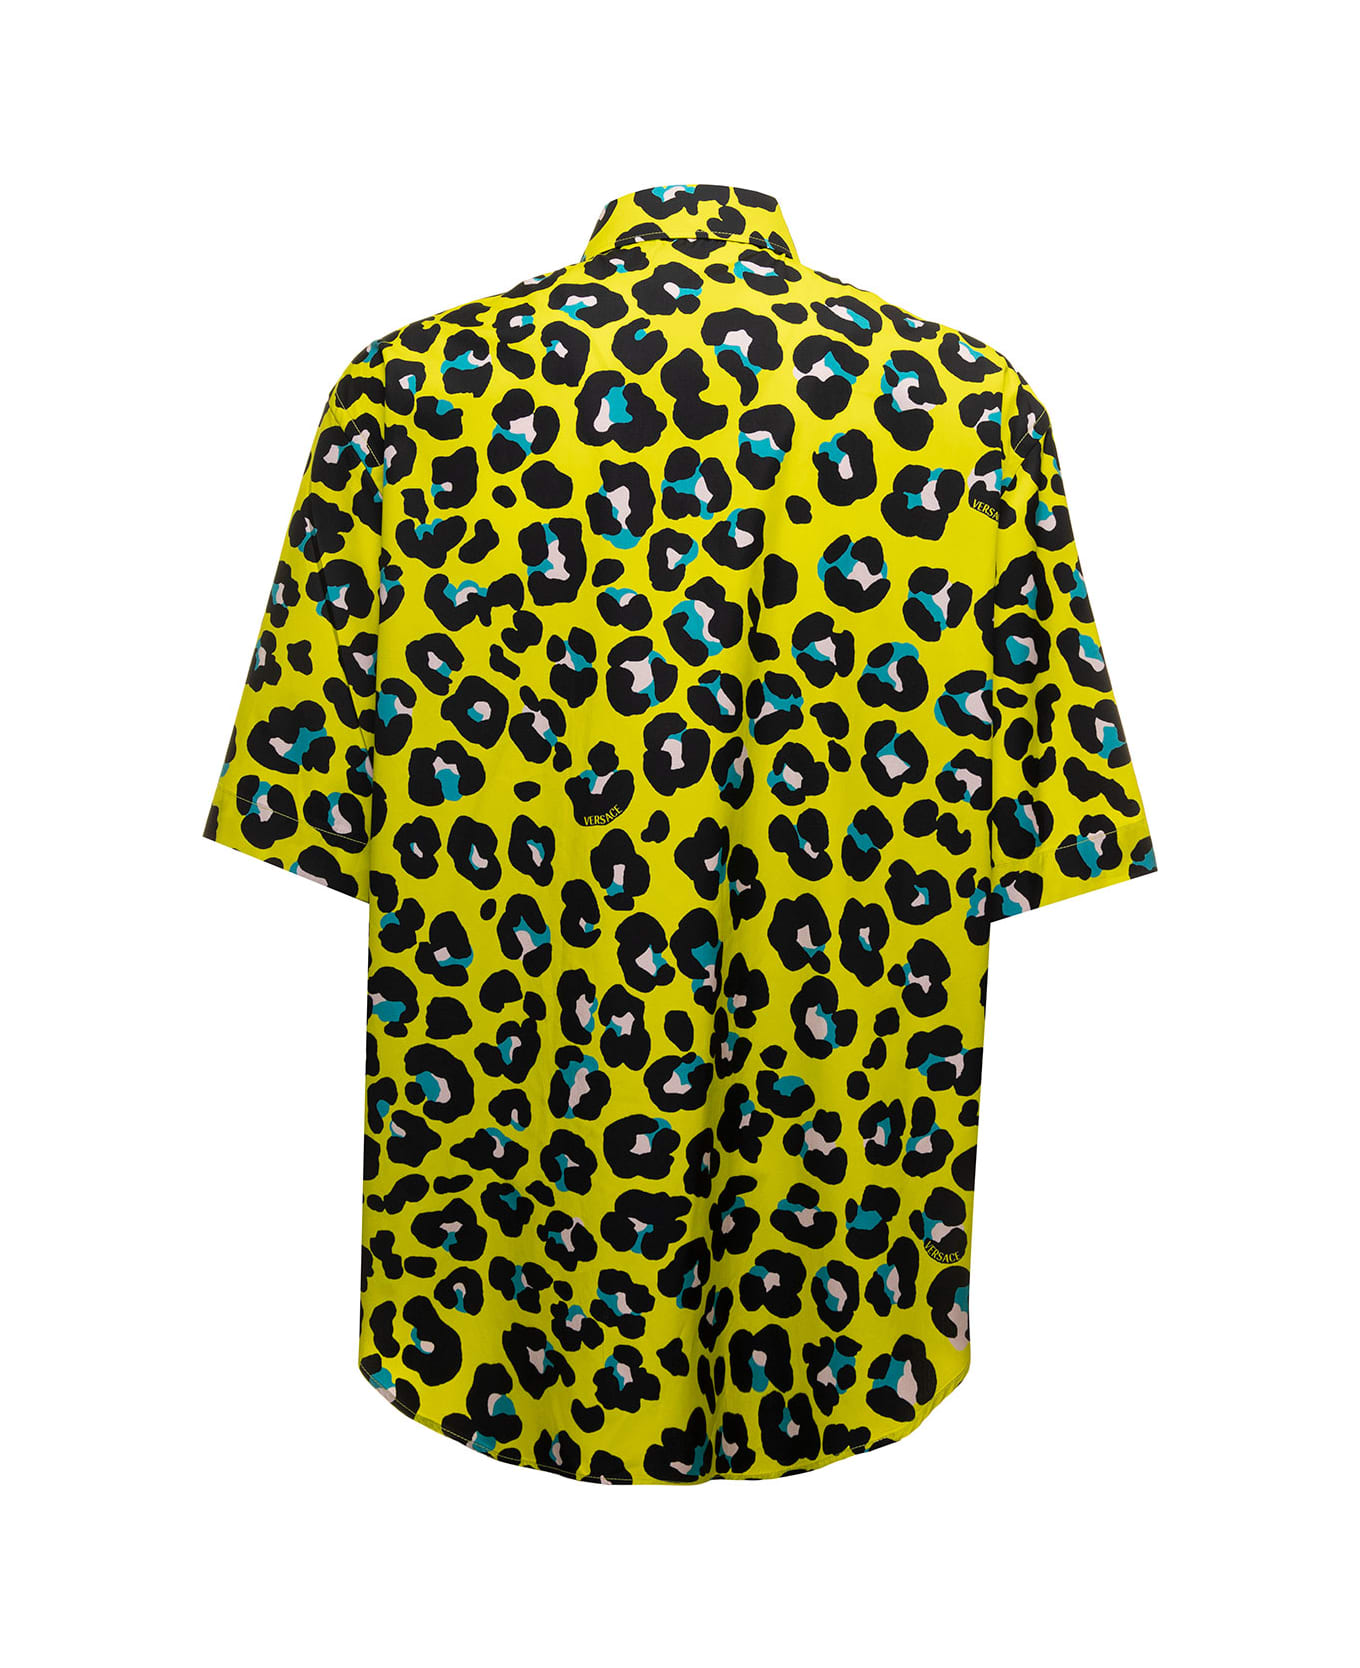 Versace Yellow Shirt In Cotton With Daisy Leopard Allover Pattern Man - Leopardato